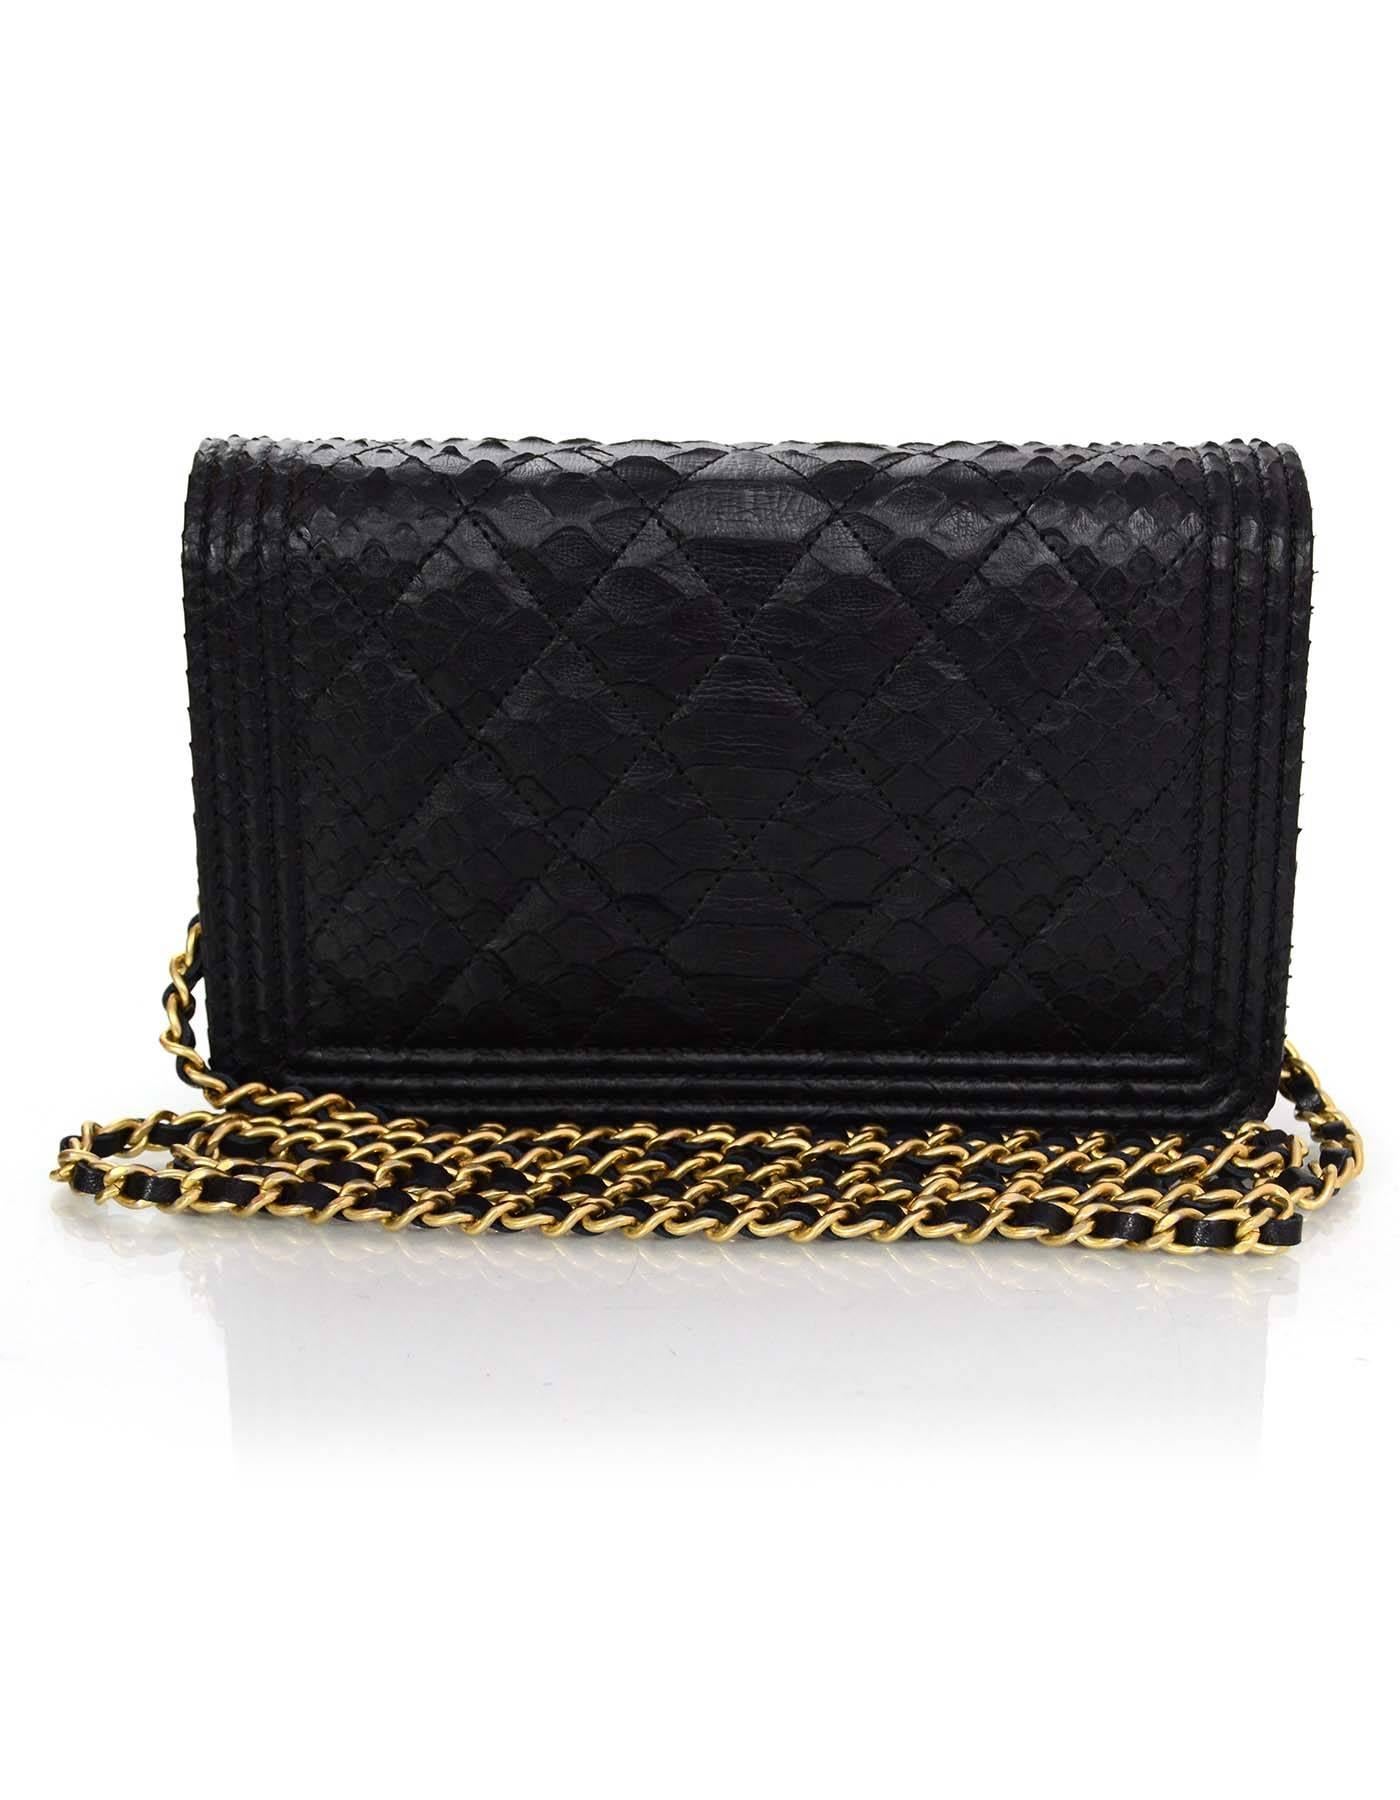 Chanel NEW '17 Black Python Boy WOC Bag

Made In: Italy
Year of Production: 2017
Color: Black
Hardware: Goldtone
Materials: Python 
Lining: Black leather and grosgrain
Closure/Opening: Flap top with magnetic snap closure
Exterior Pockets: